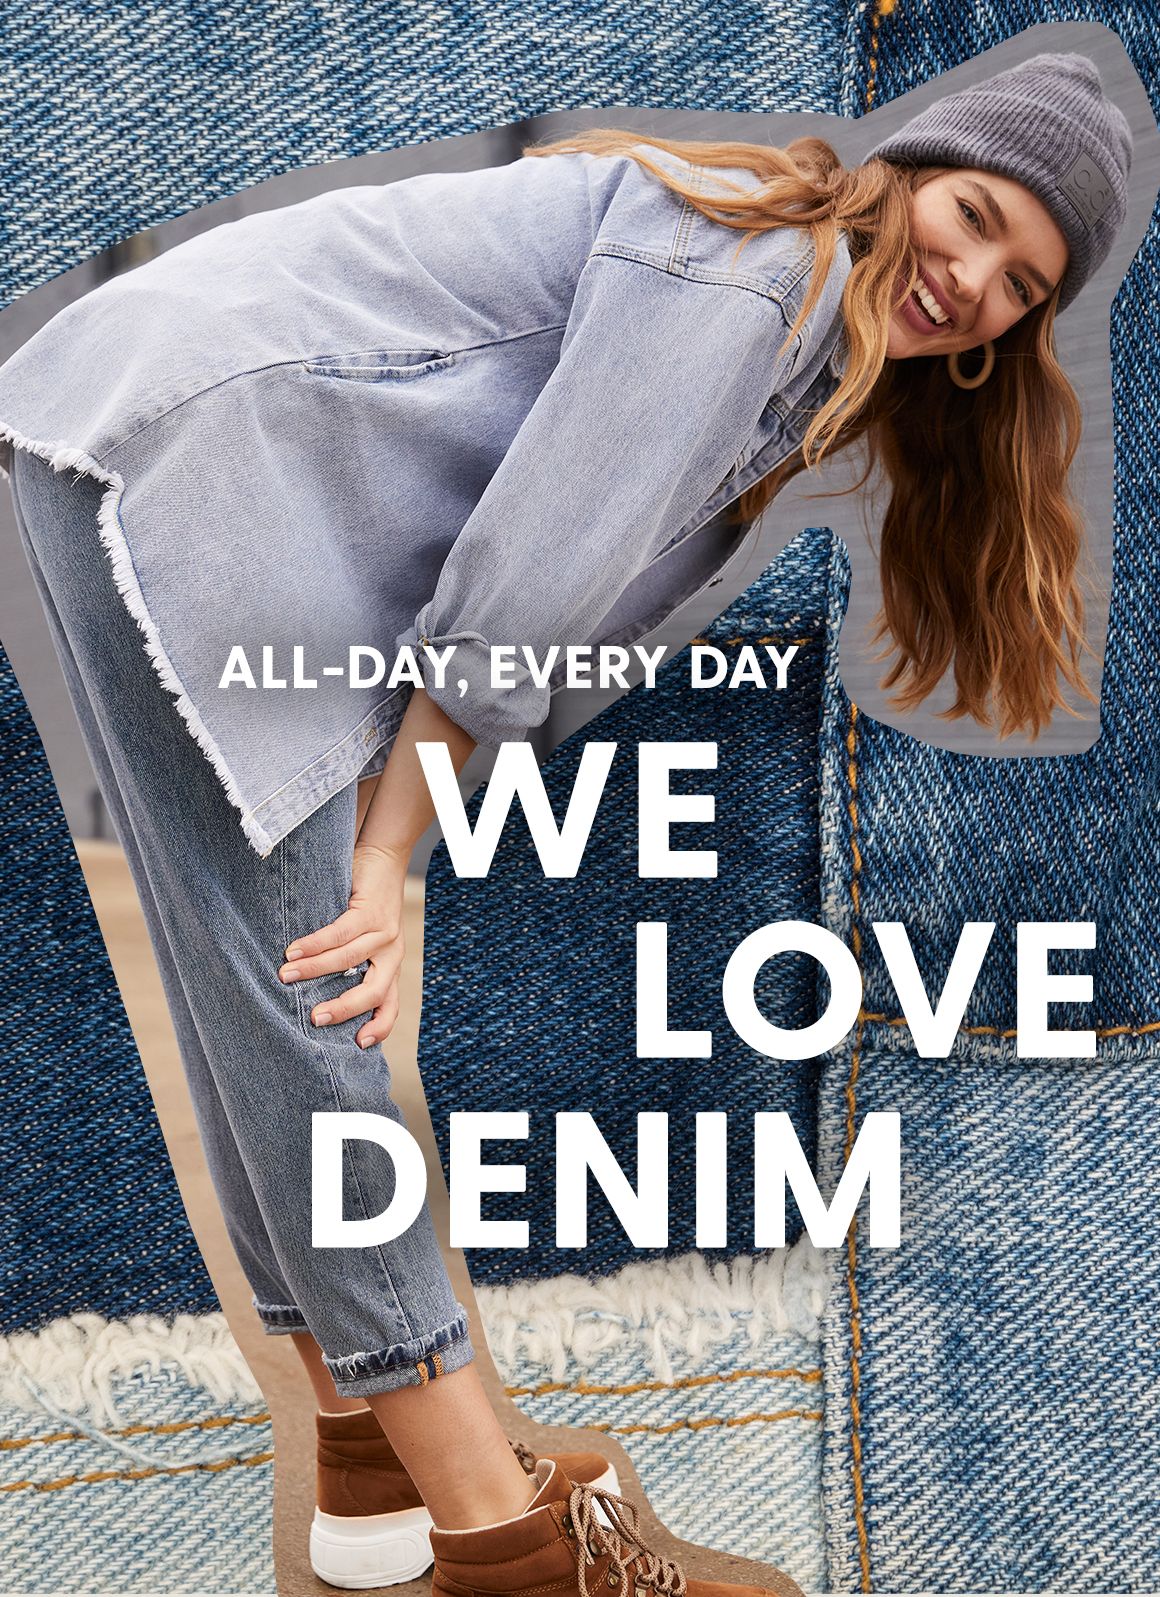 All-day, Every day We love denim. 